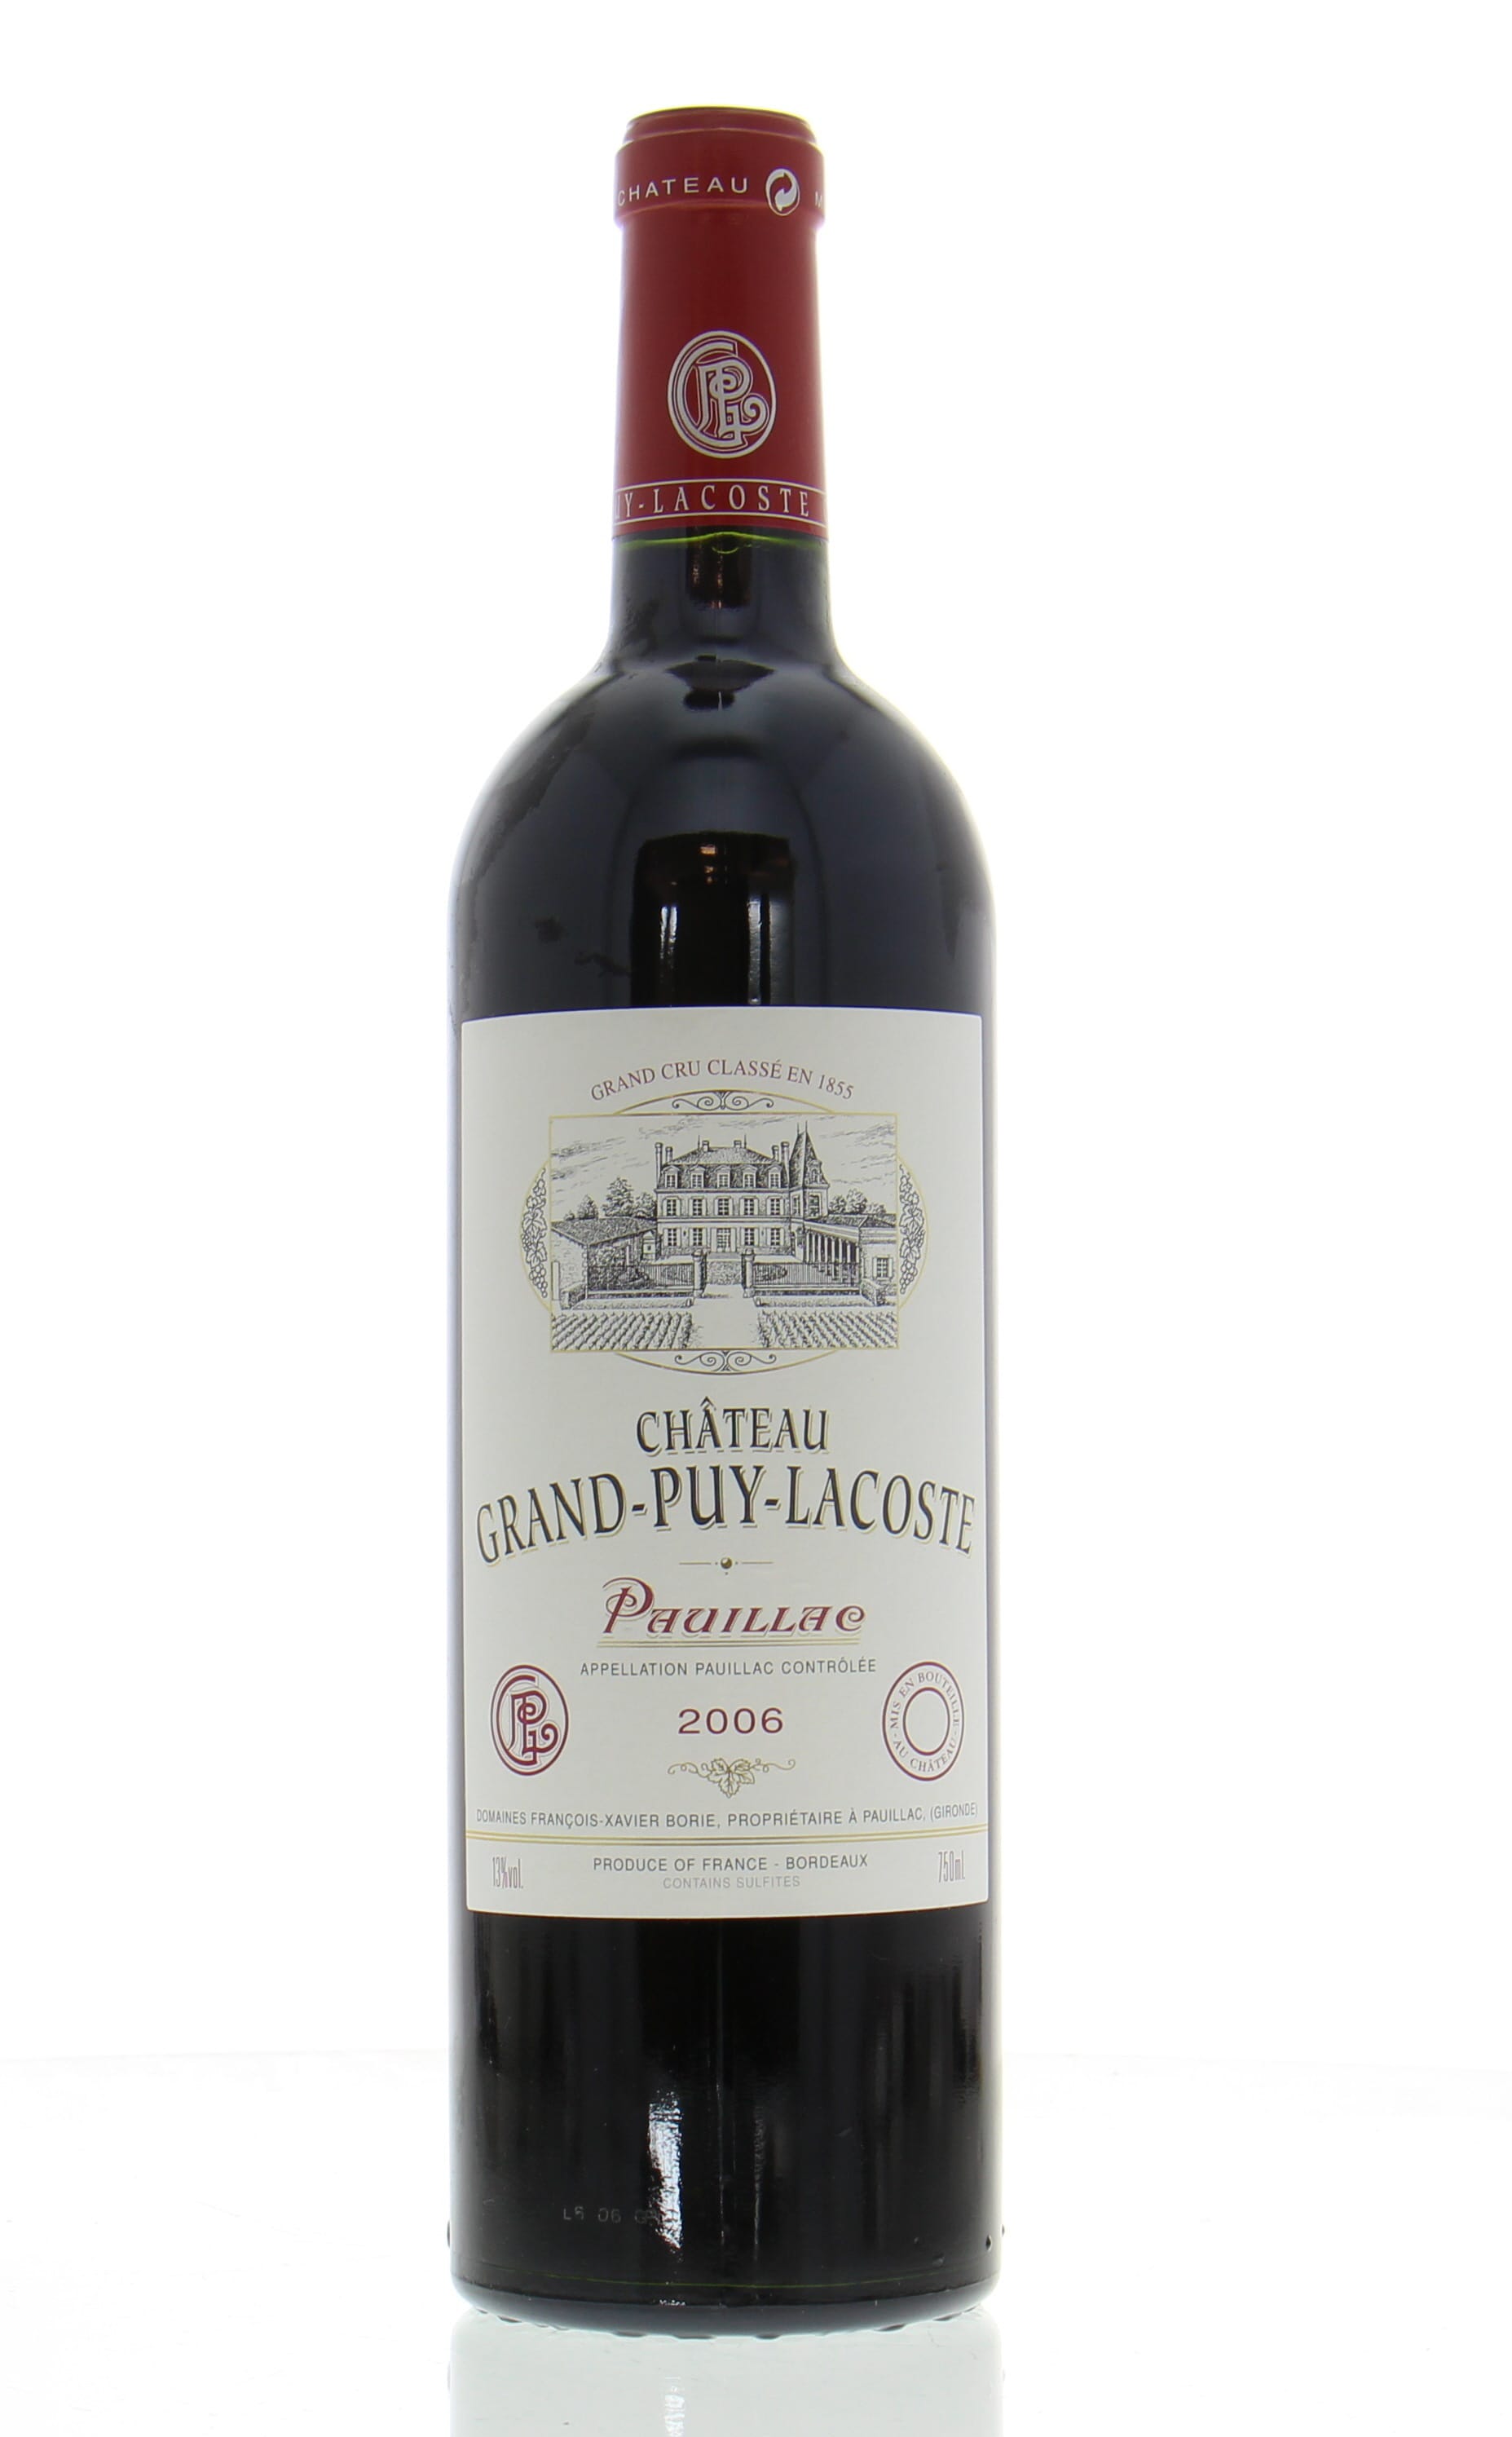 Chateau Grand Puy Lacoste - Chateau Grand Puy Lacoste 2006 perfect